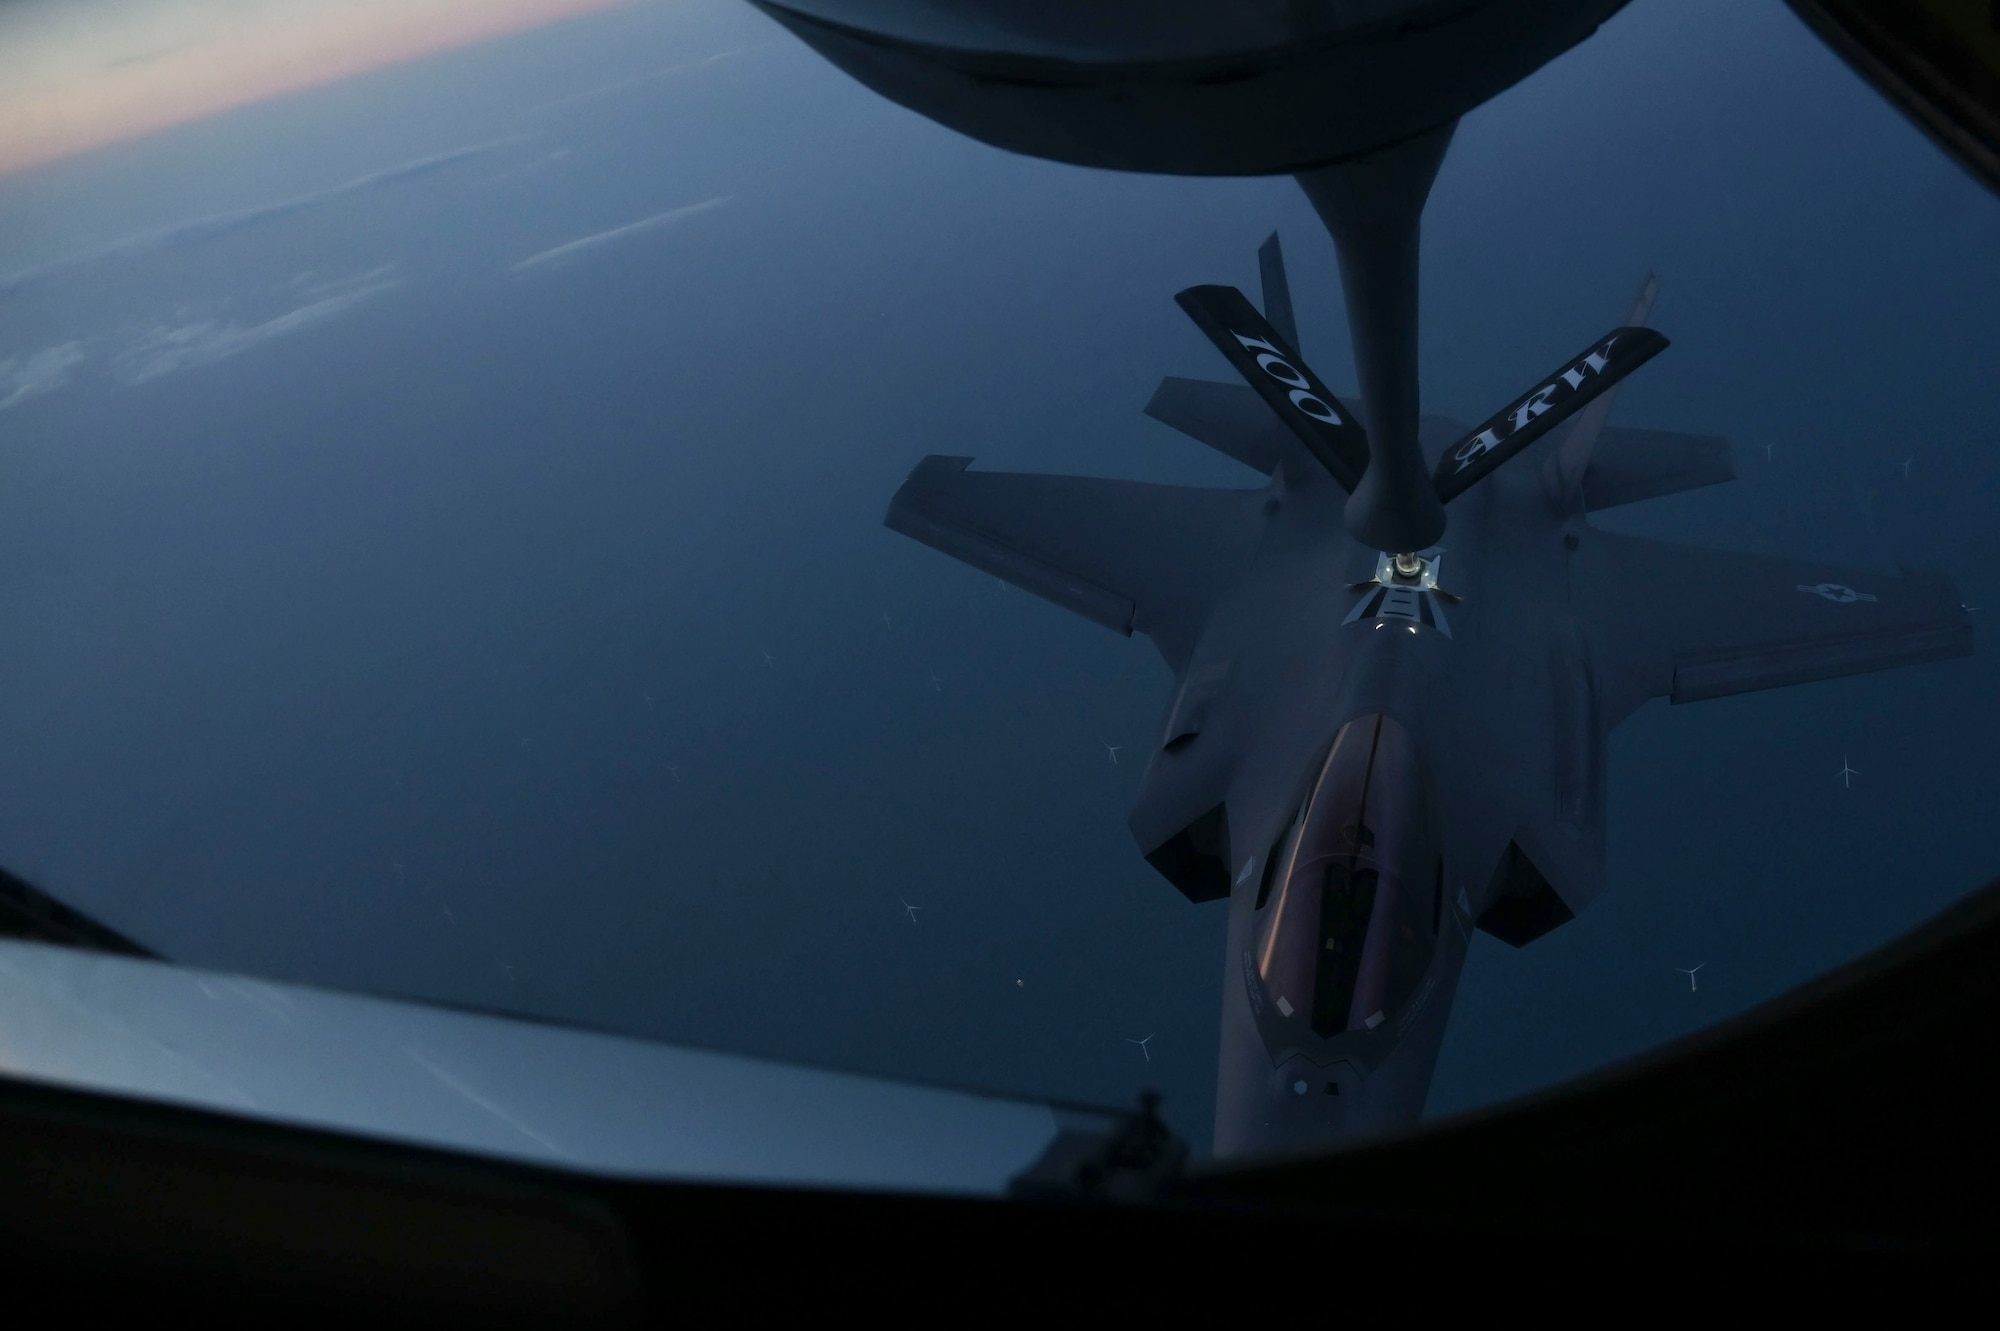 An all-female aircrew, stationed at RAF Mildenhall, refueled four F-35s from the 48th Fighter Wing as part of an all-women's incentive flight.